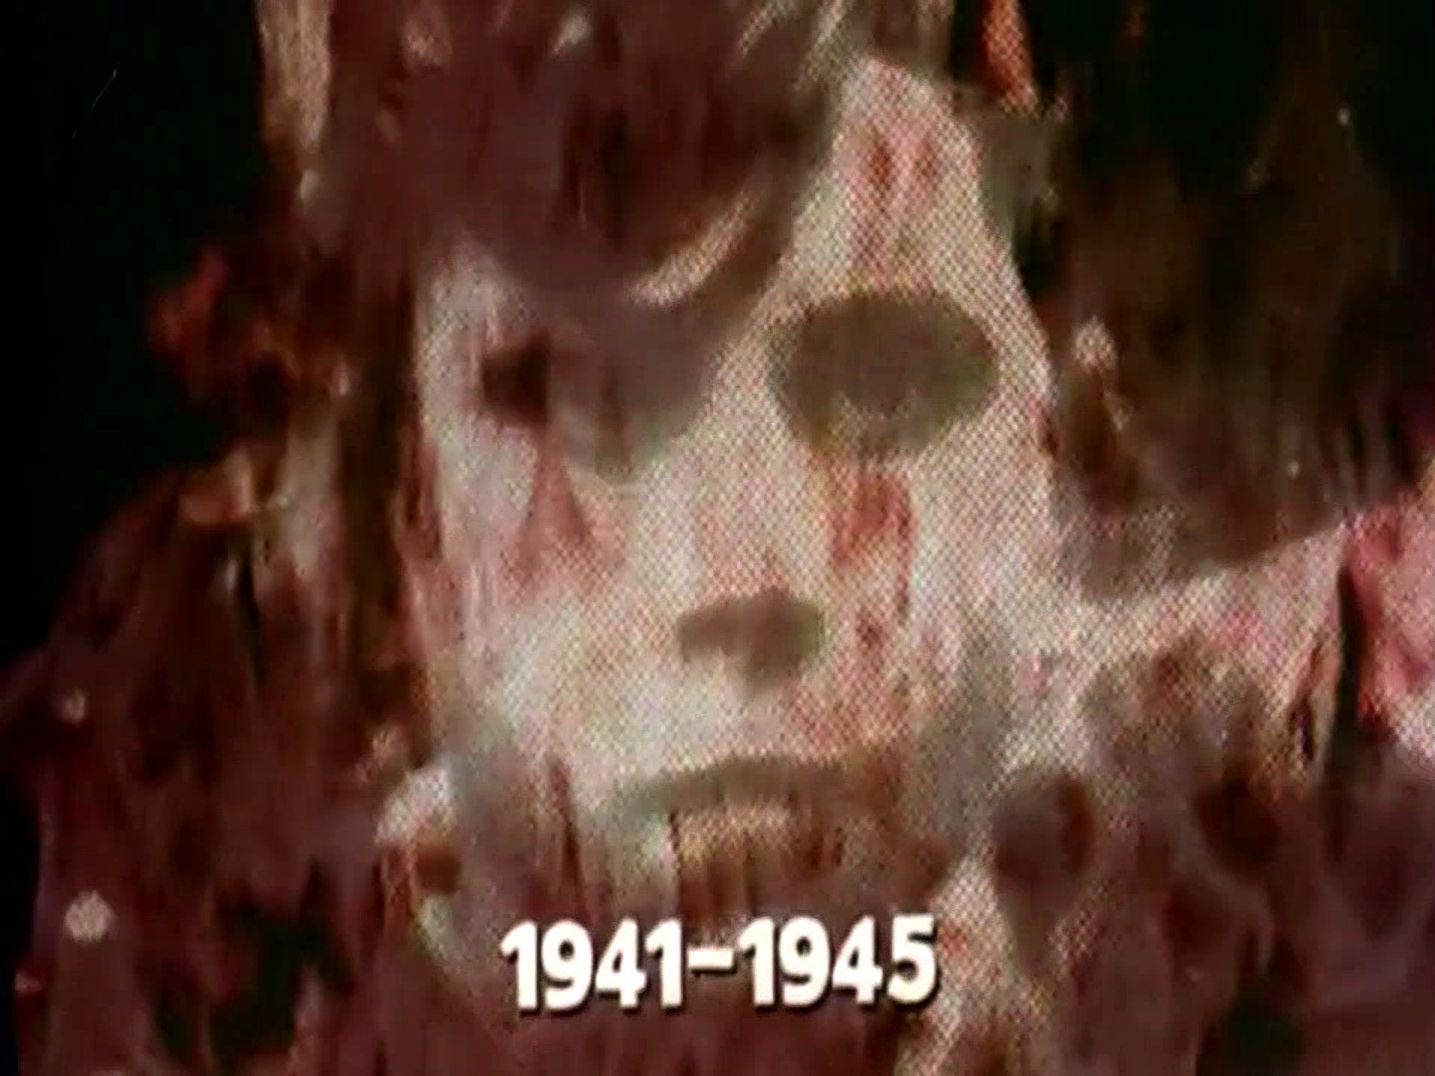 Main title from the 1974 ‘Japan’ episode of The World at War (1973-1974) (2). 1941-1945